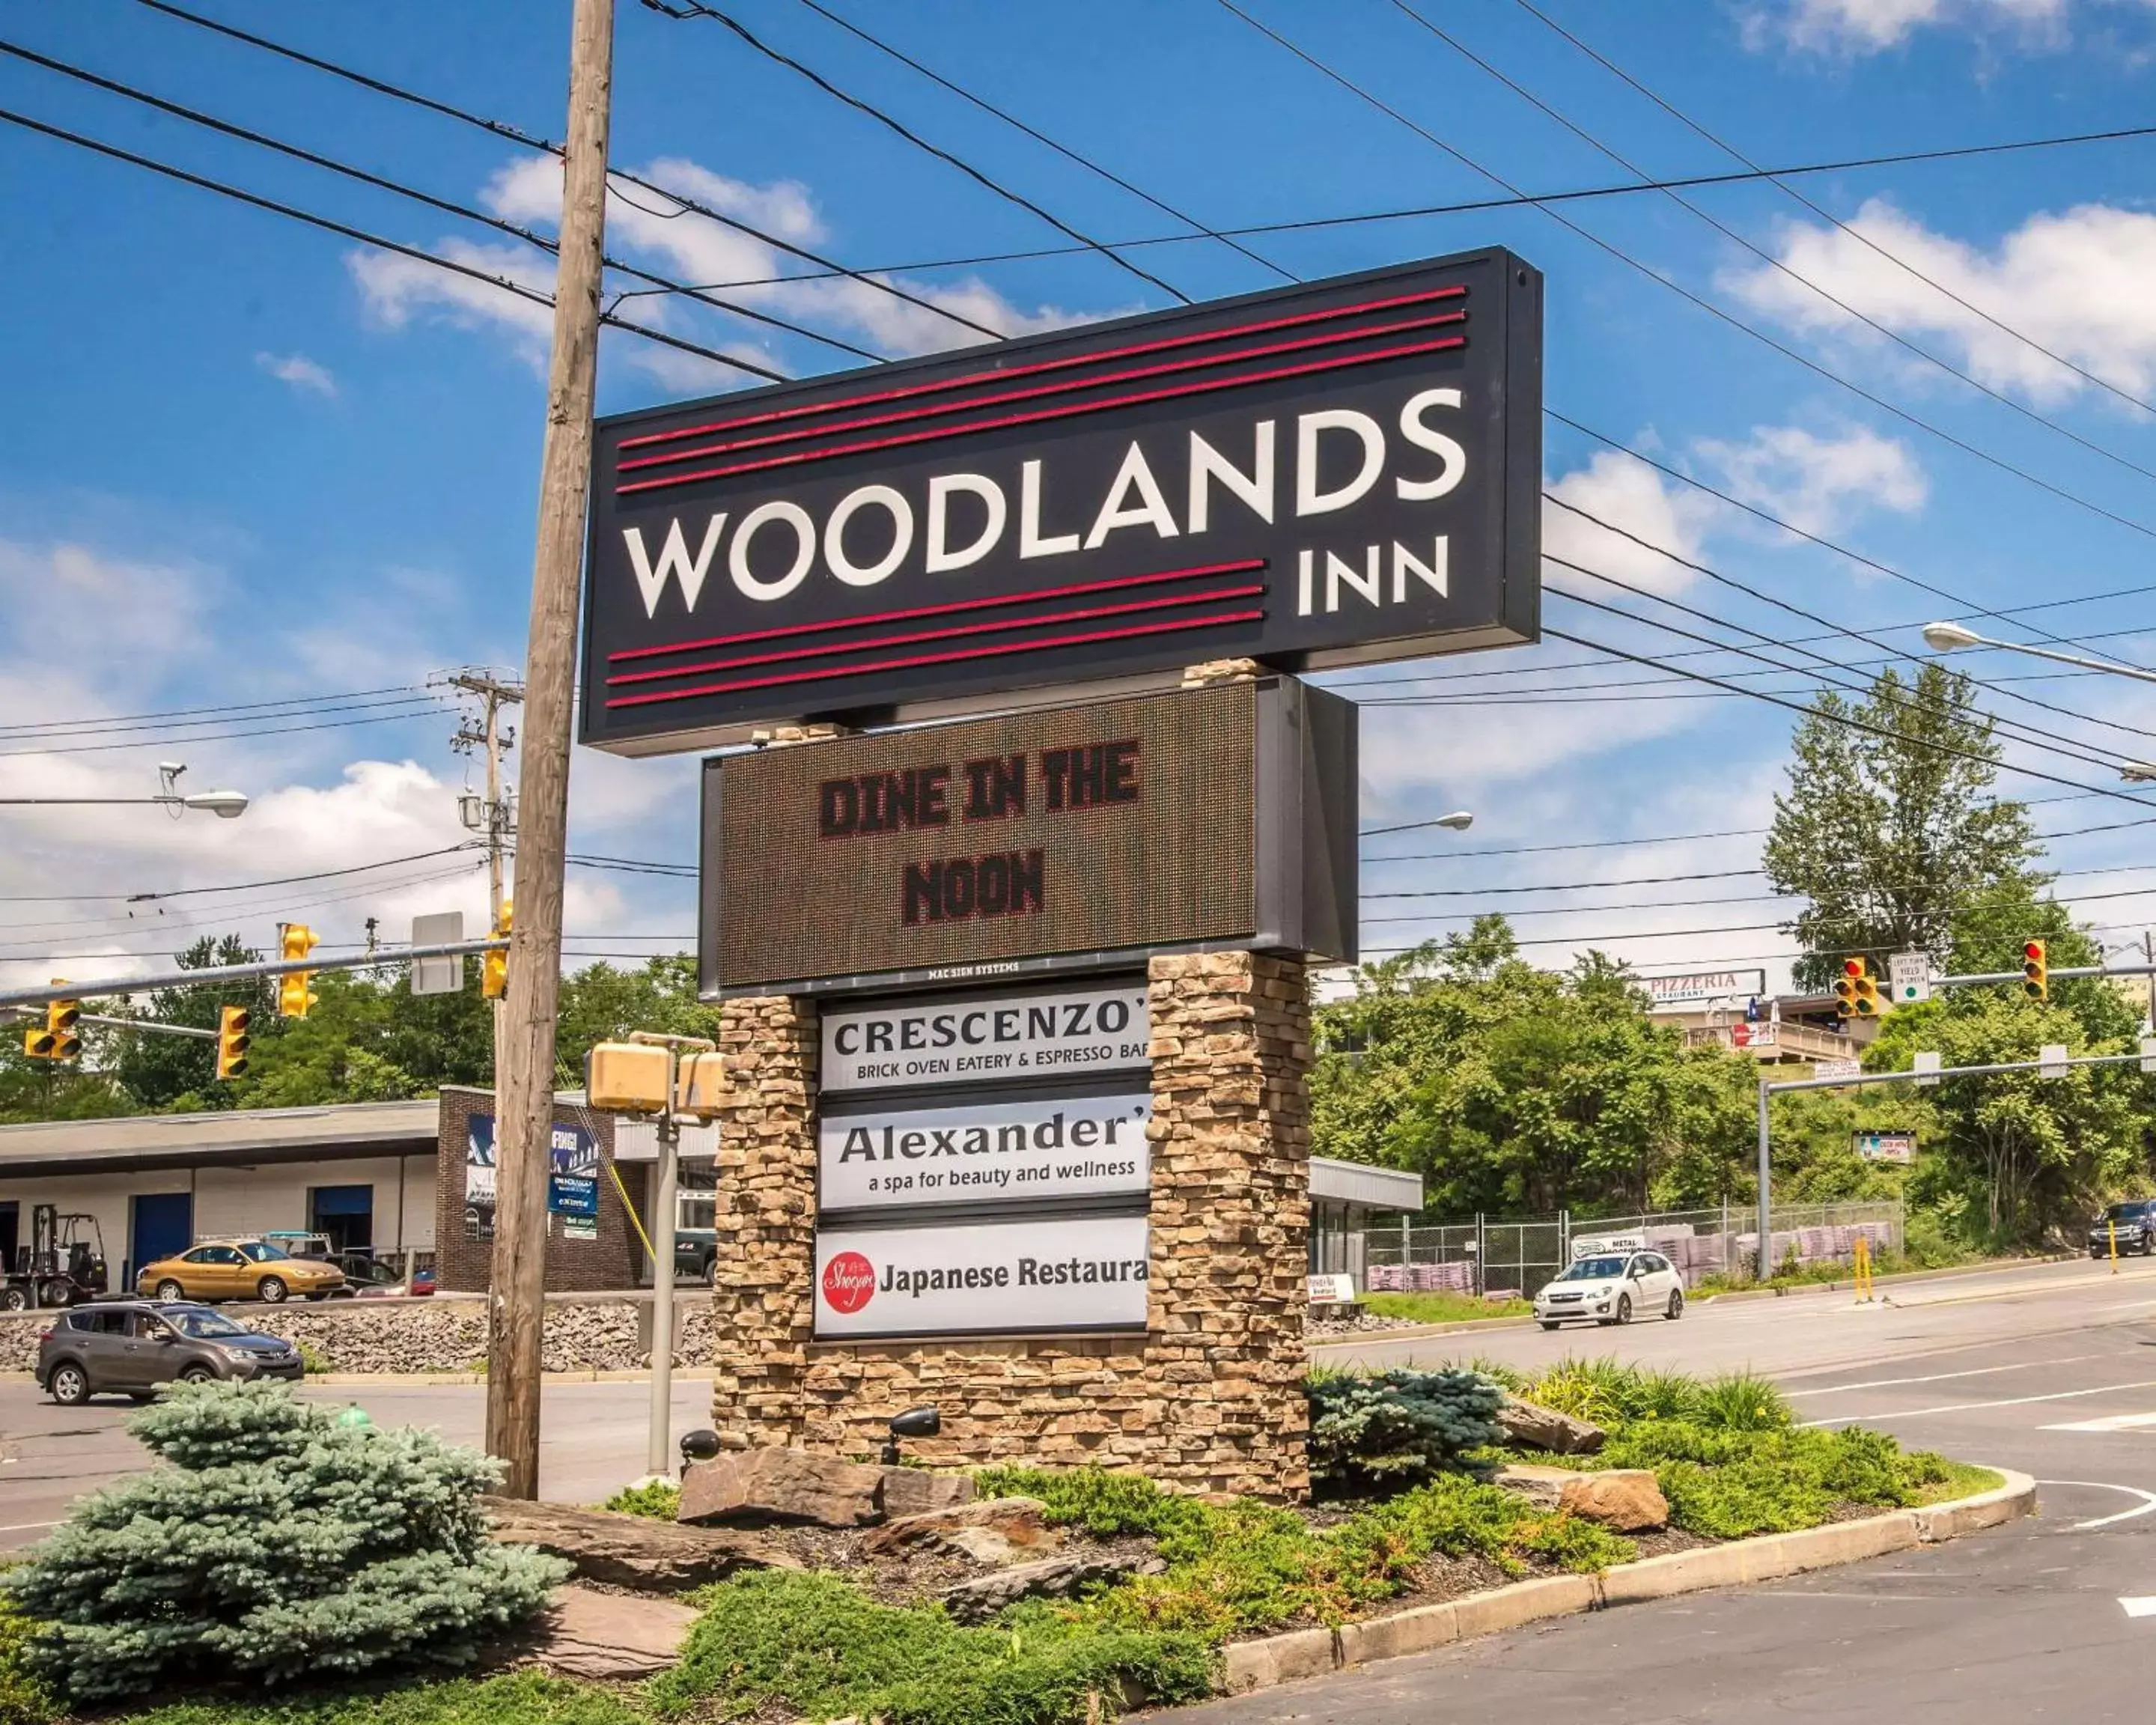 Property building in The Woodlands Inn